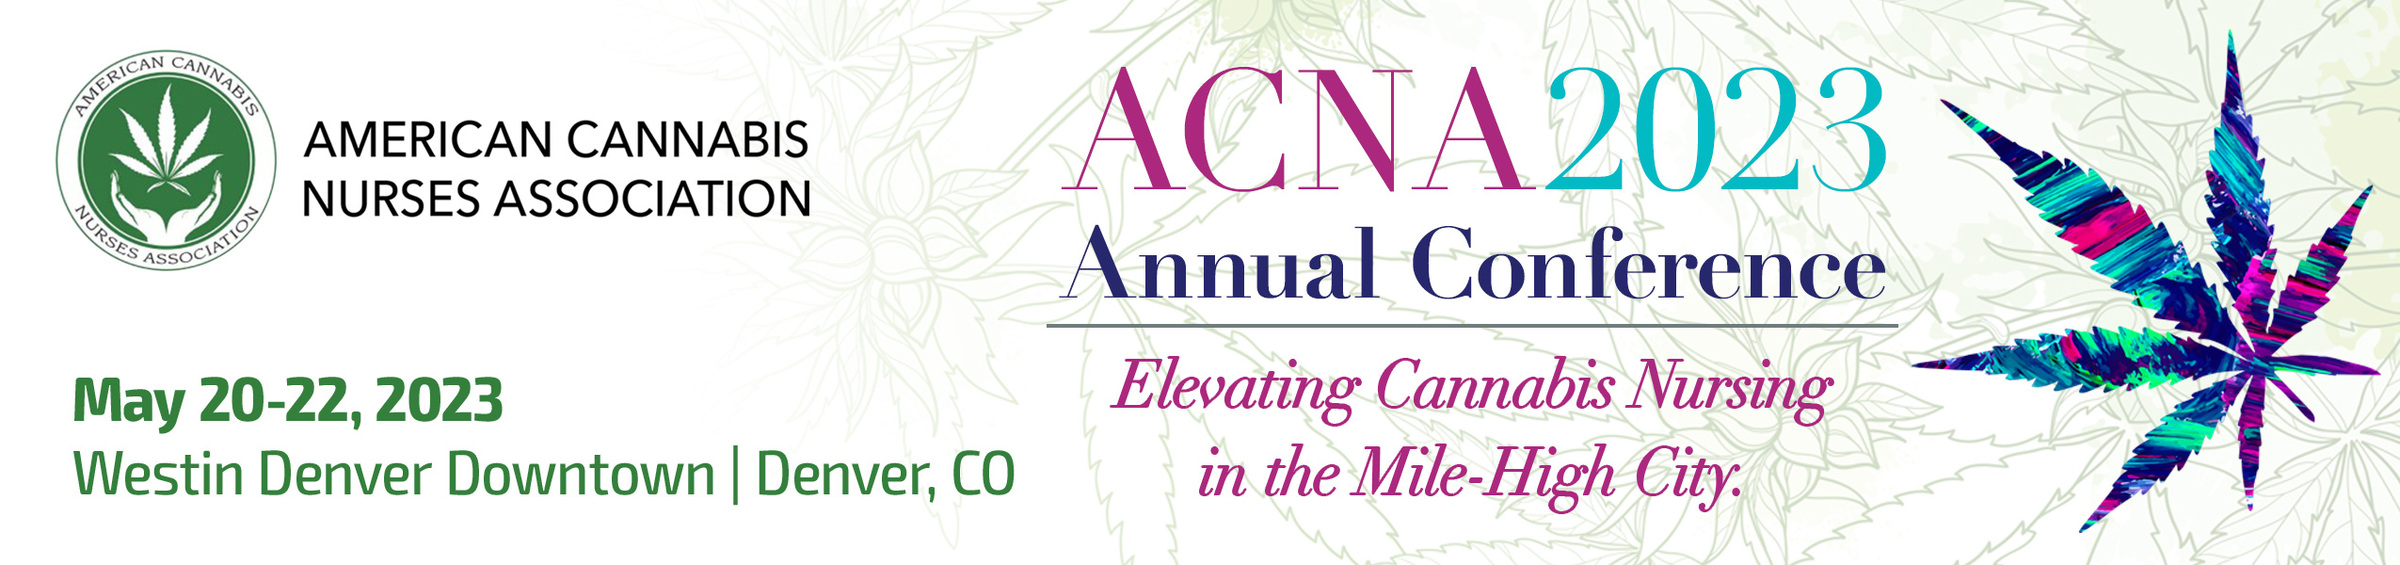 ACNA 2023 Annual Conference